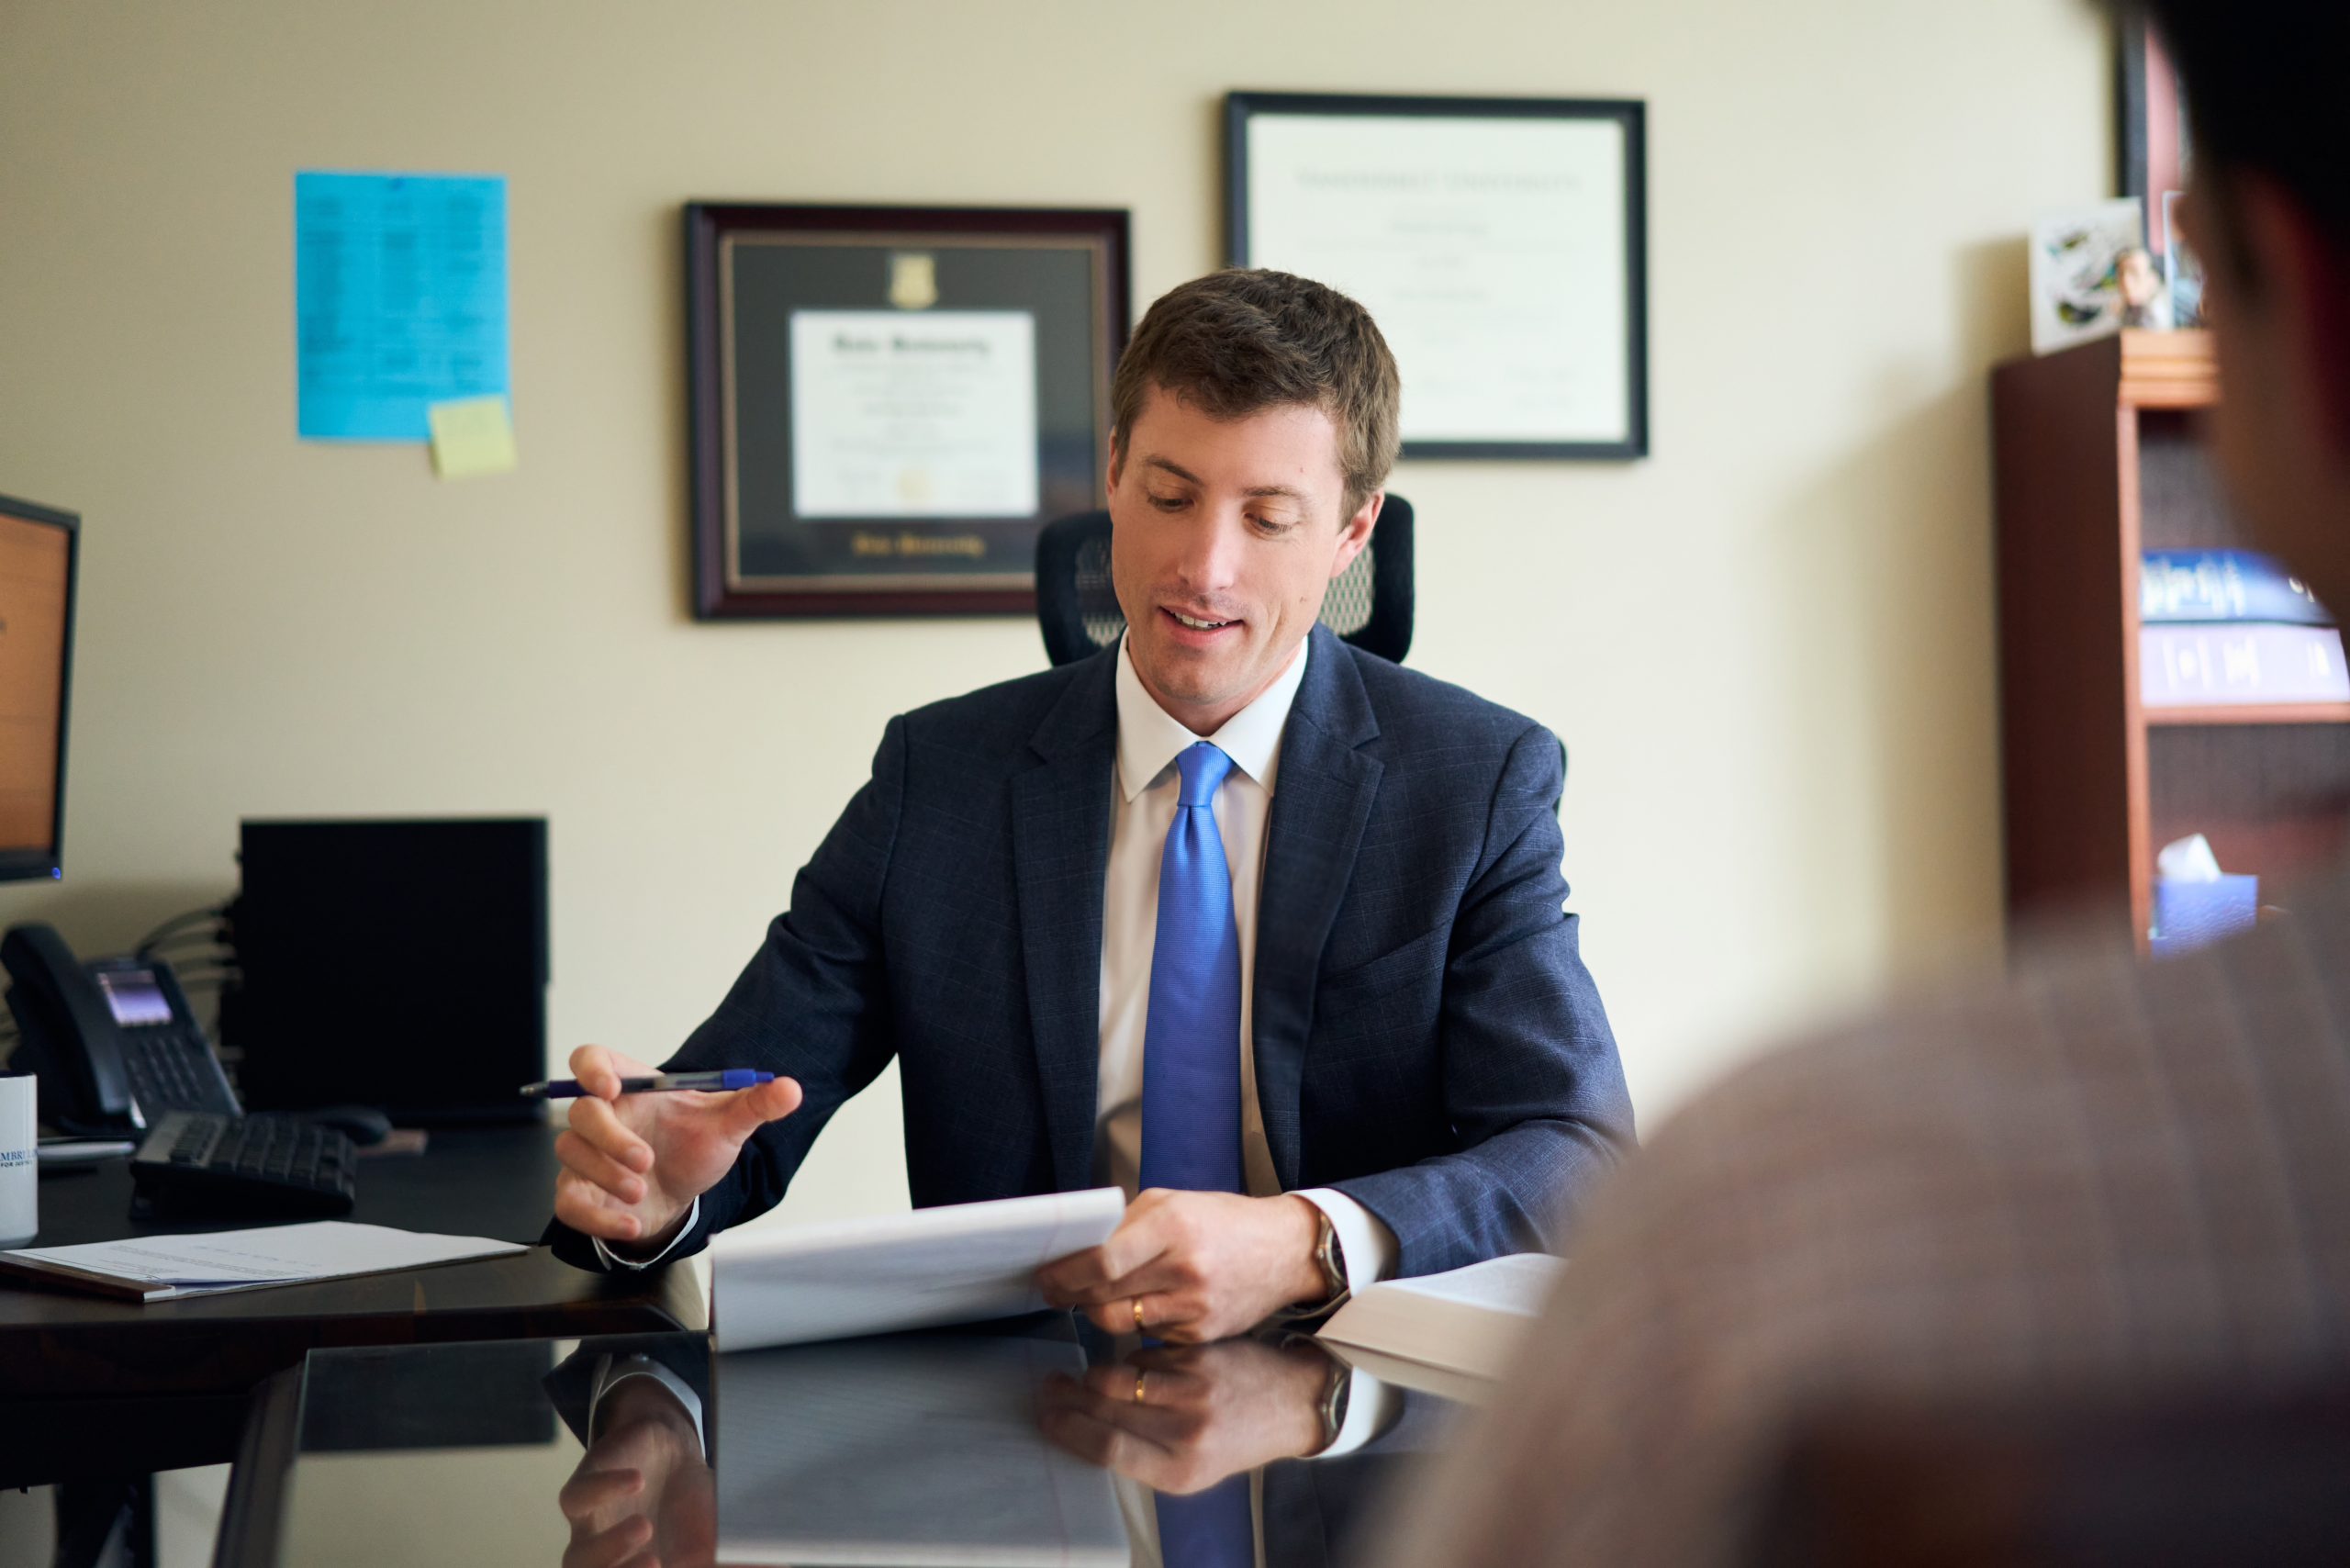 Washington DC car accident lawyer at RHL law attorneys Chris Regan speaking with a client